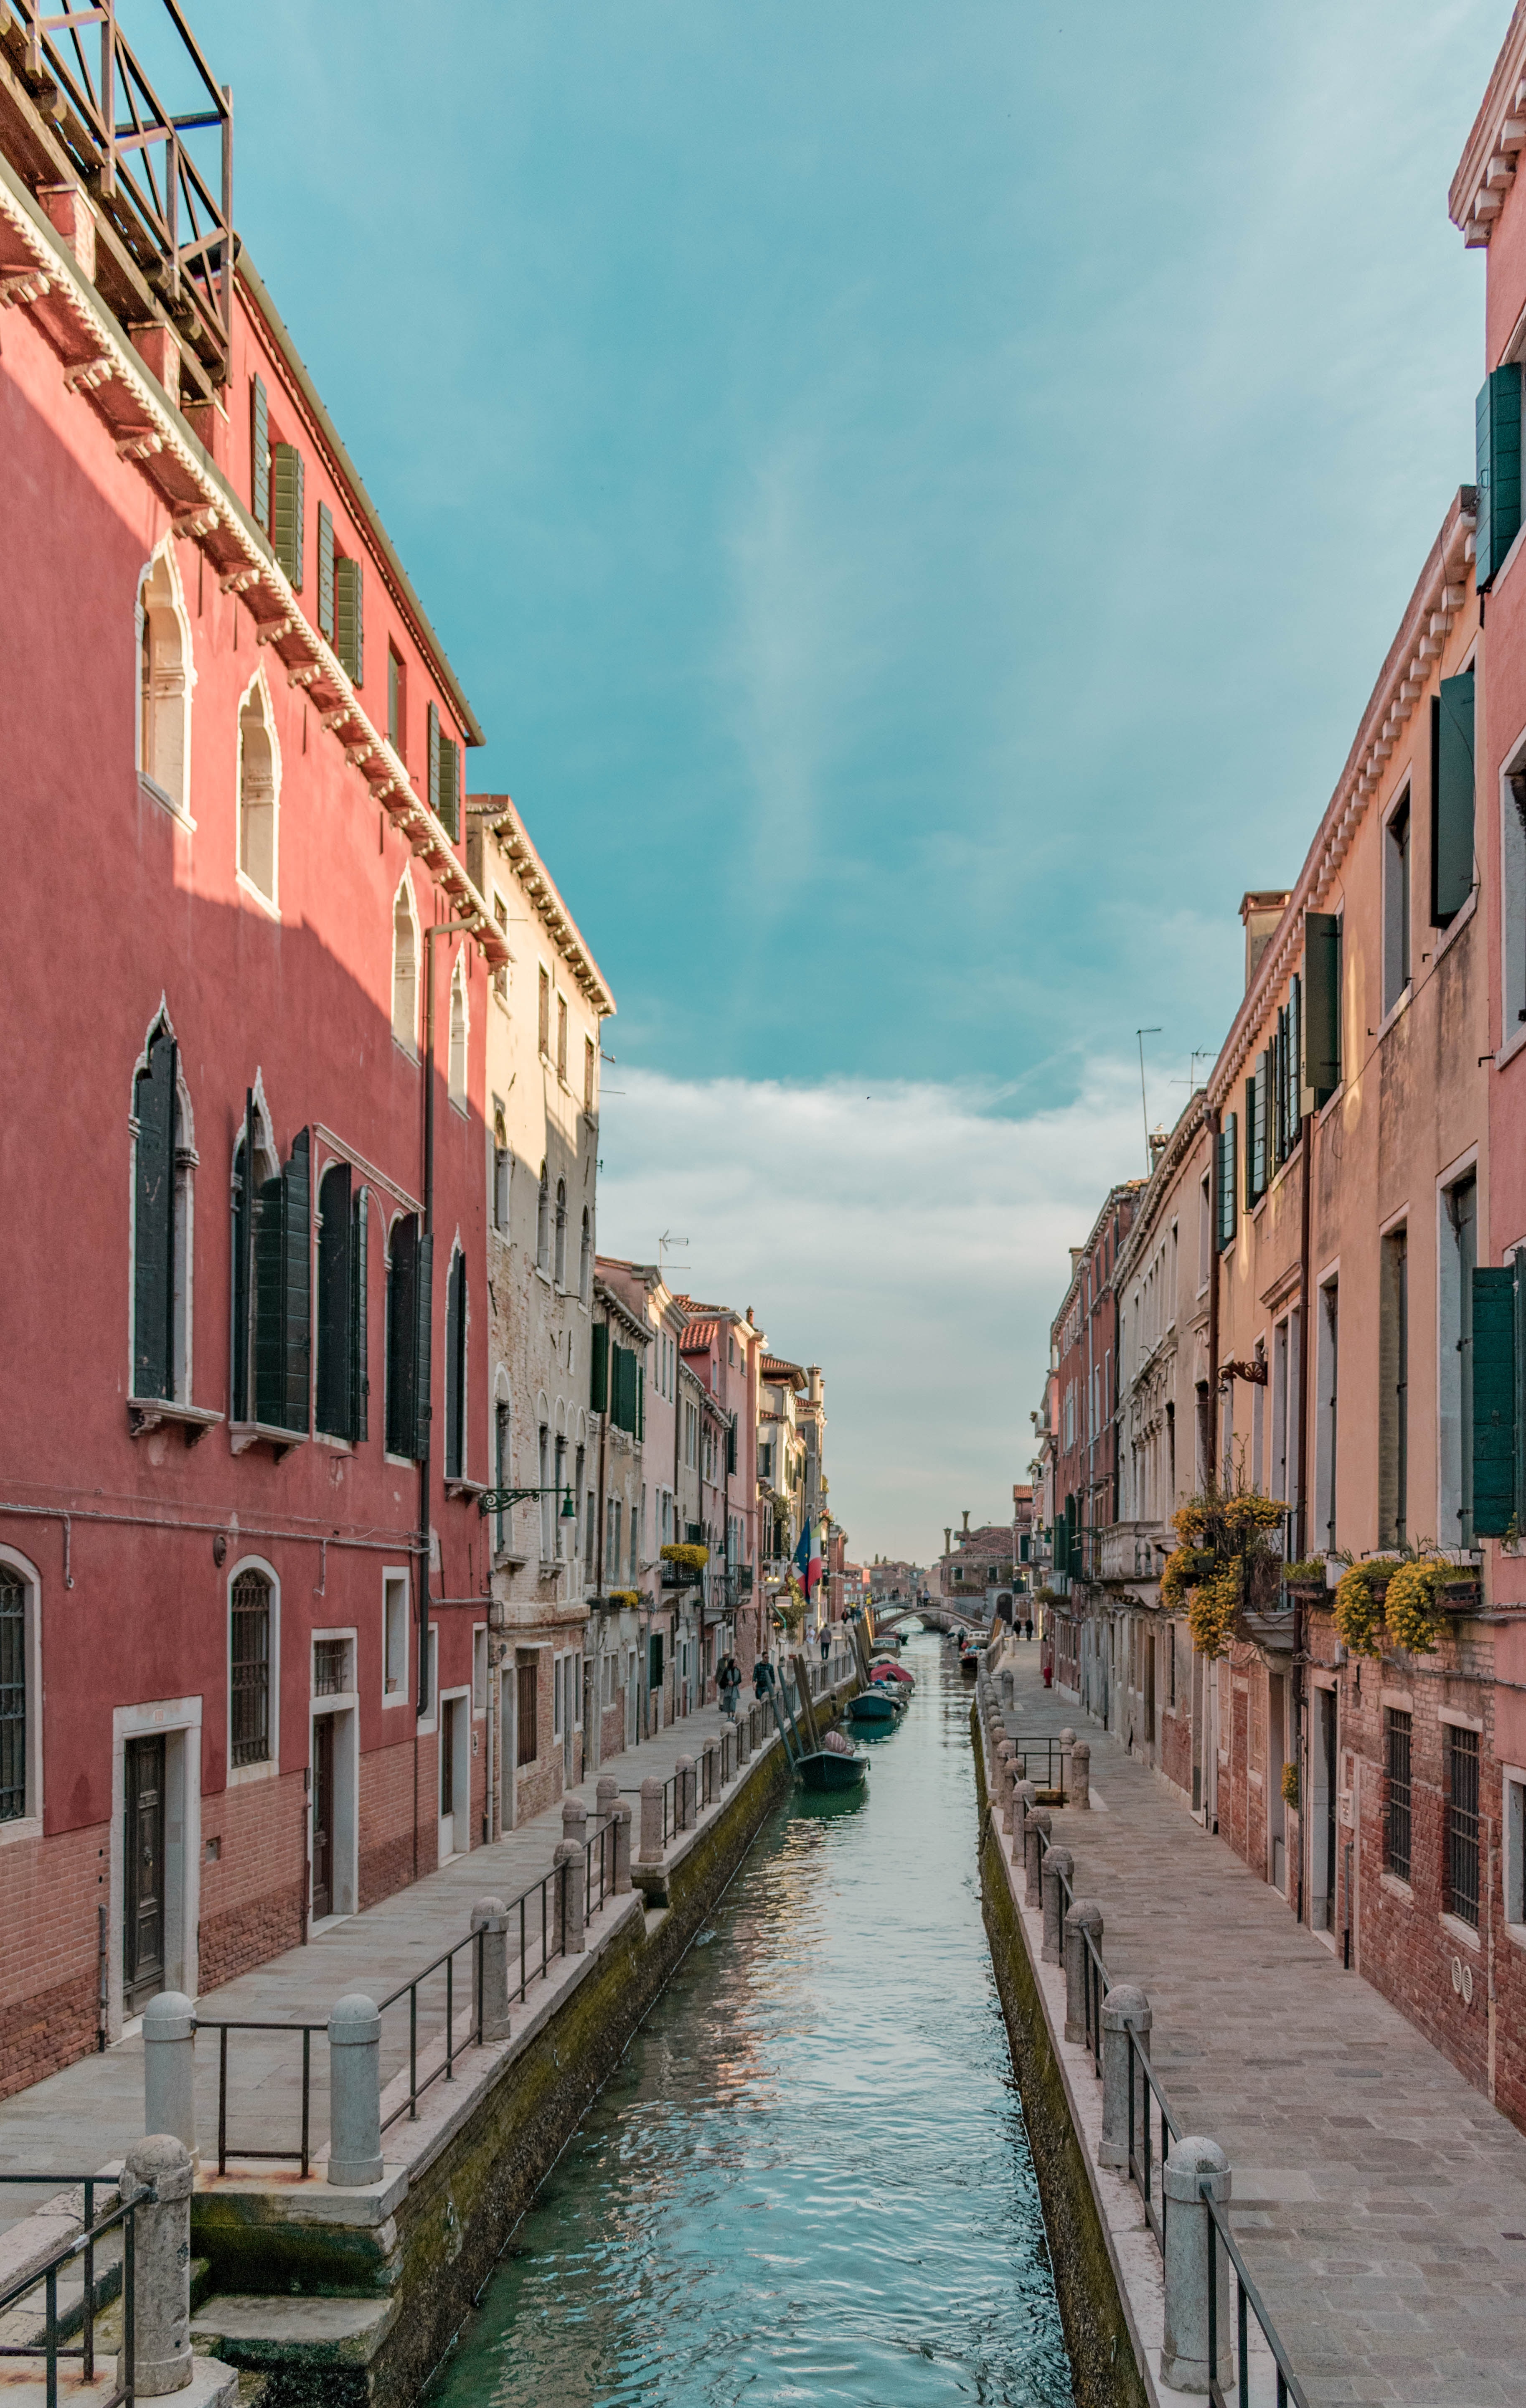 New Lock Screen Wallpapers cities, italy, venice, building, street, channel